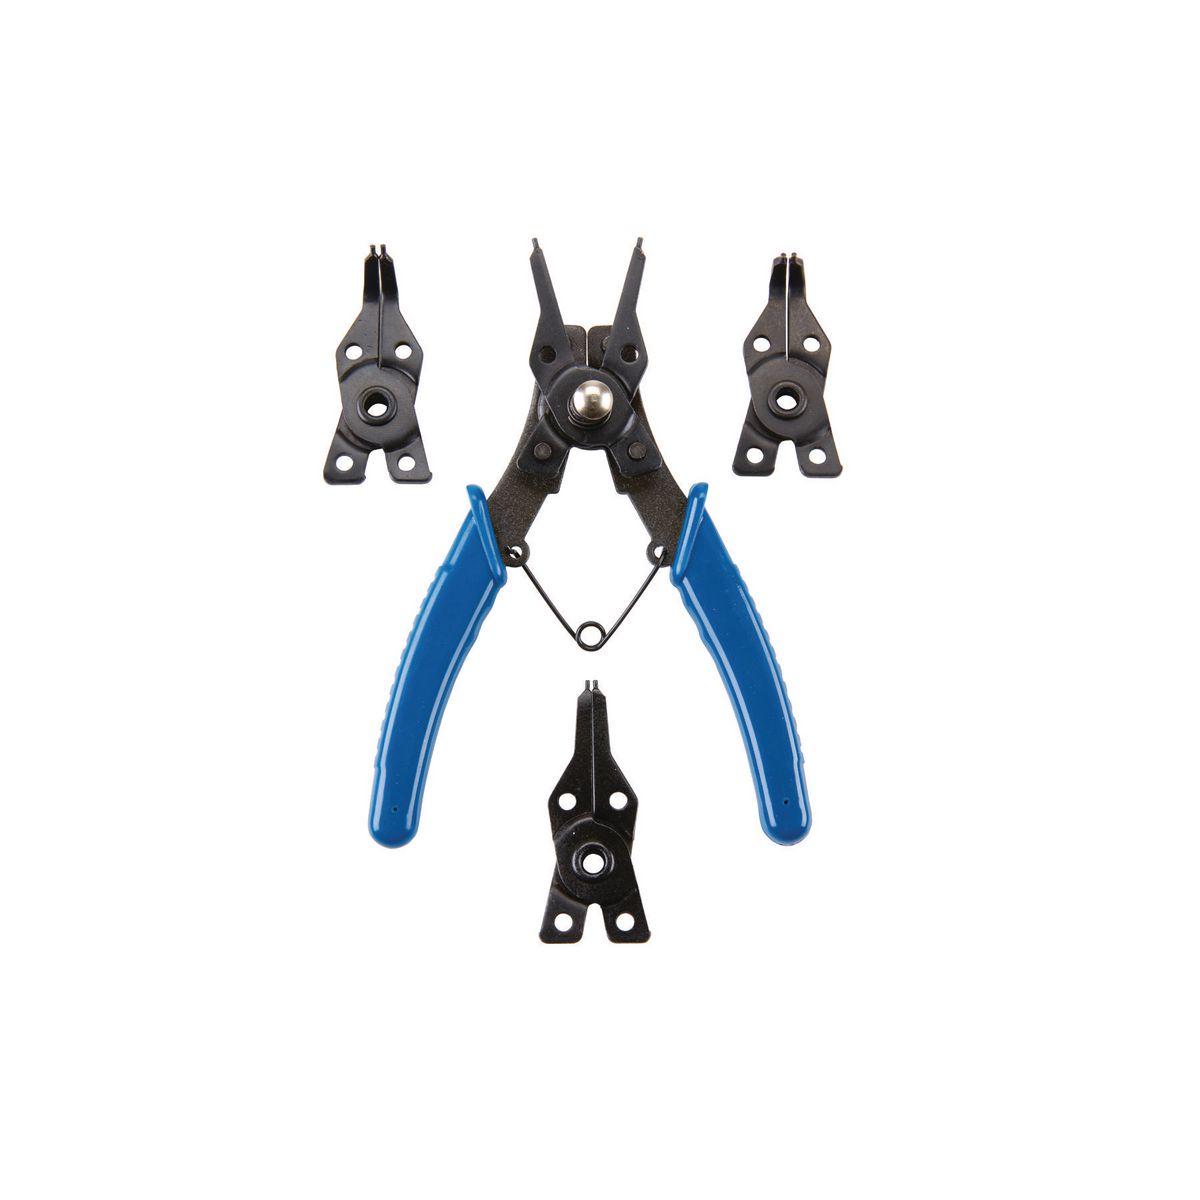 PITTSBURGH Snap Ring Pliers with Interchangeable Heads Item 63845